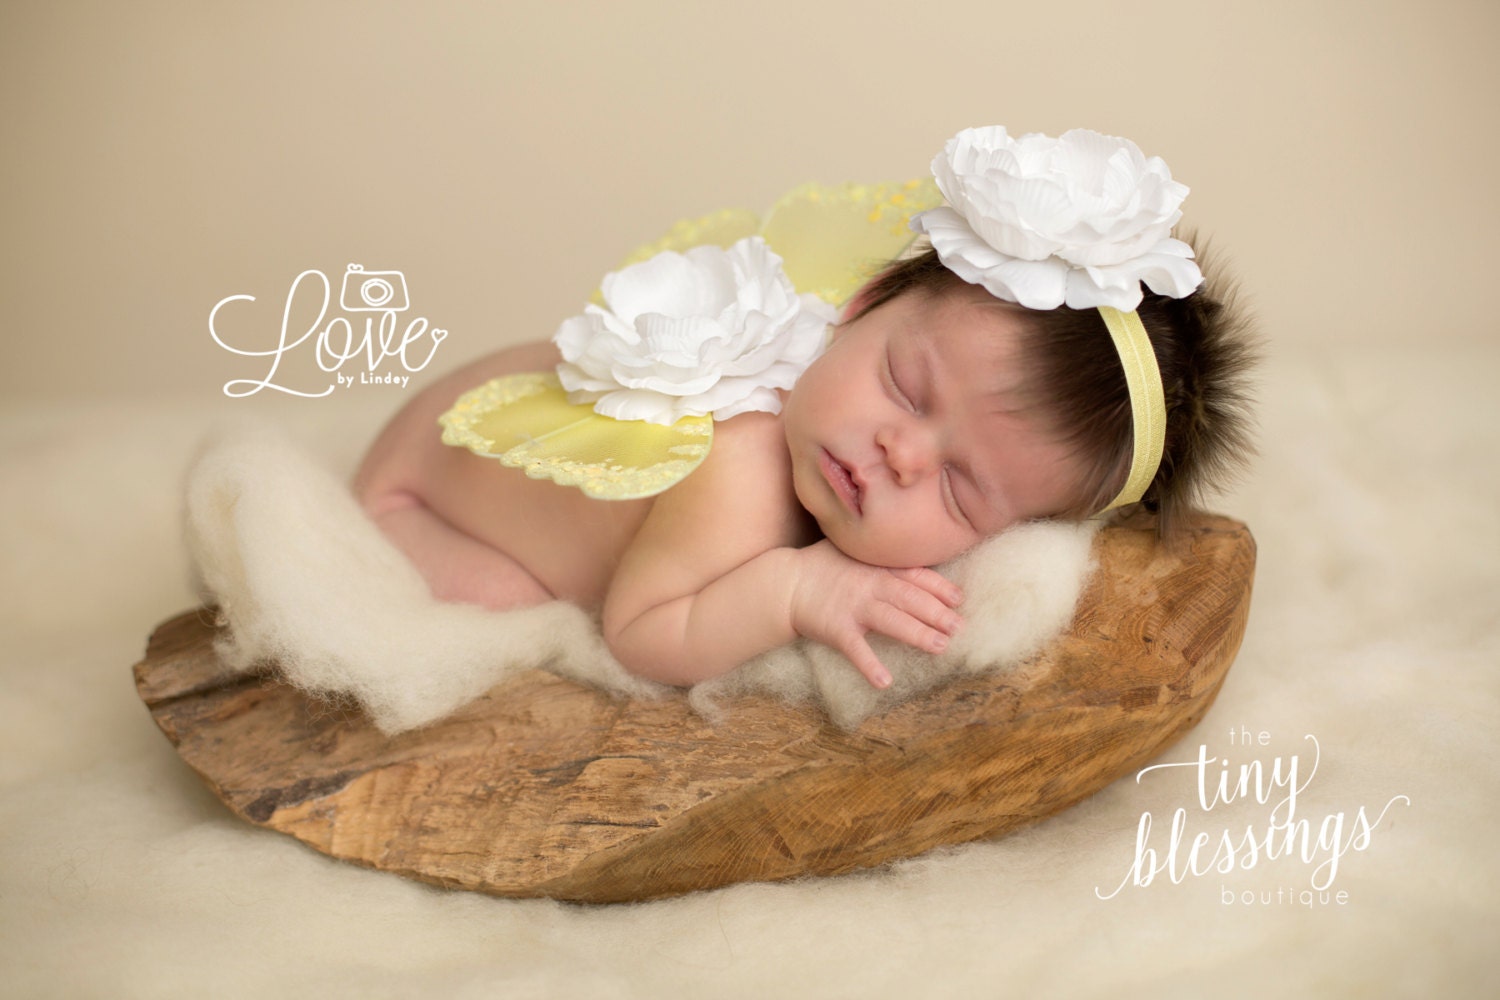 Yellow and White Butterfly Wing Set / Newborn Wings / Newborn Wing Prop / Baby Girl Headband / Newborn Photo Prop / Newborn Butterfly Wings